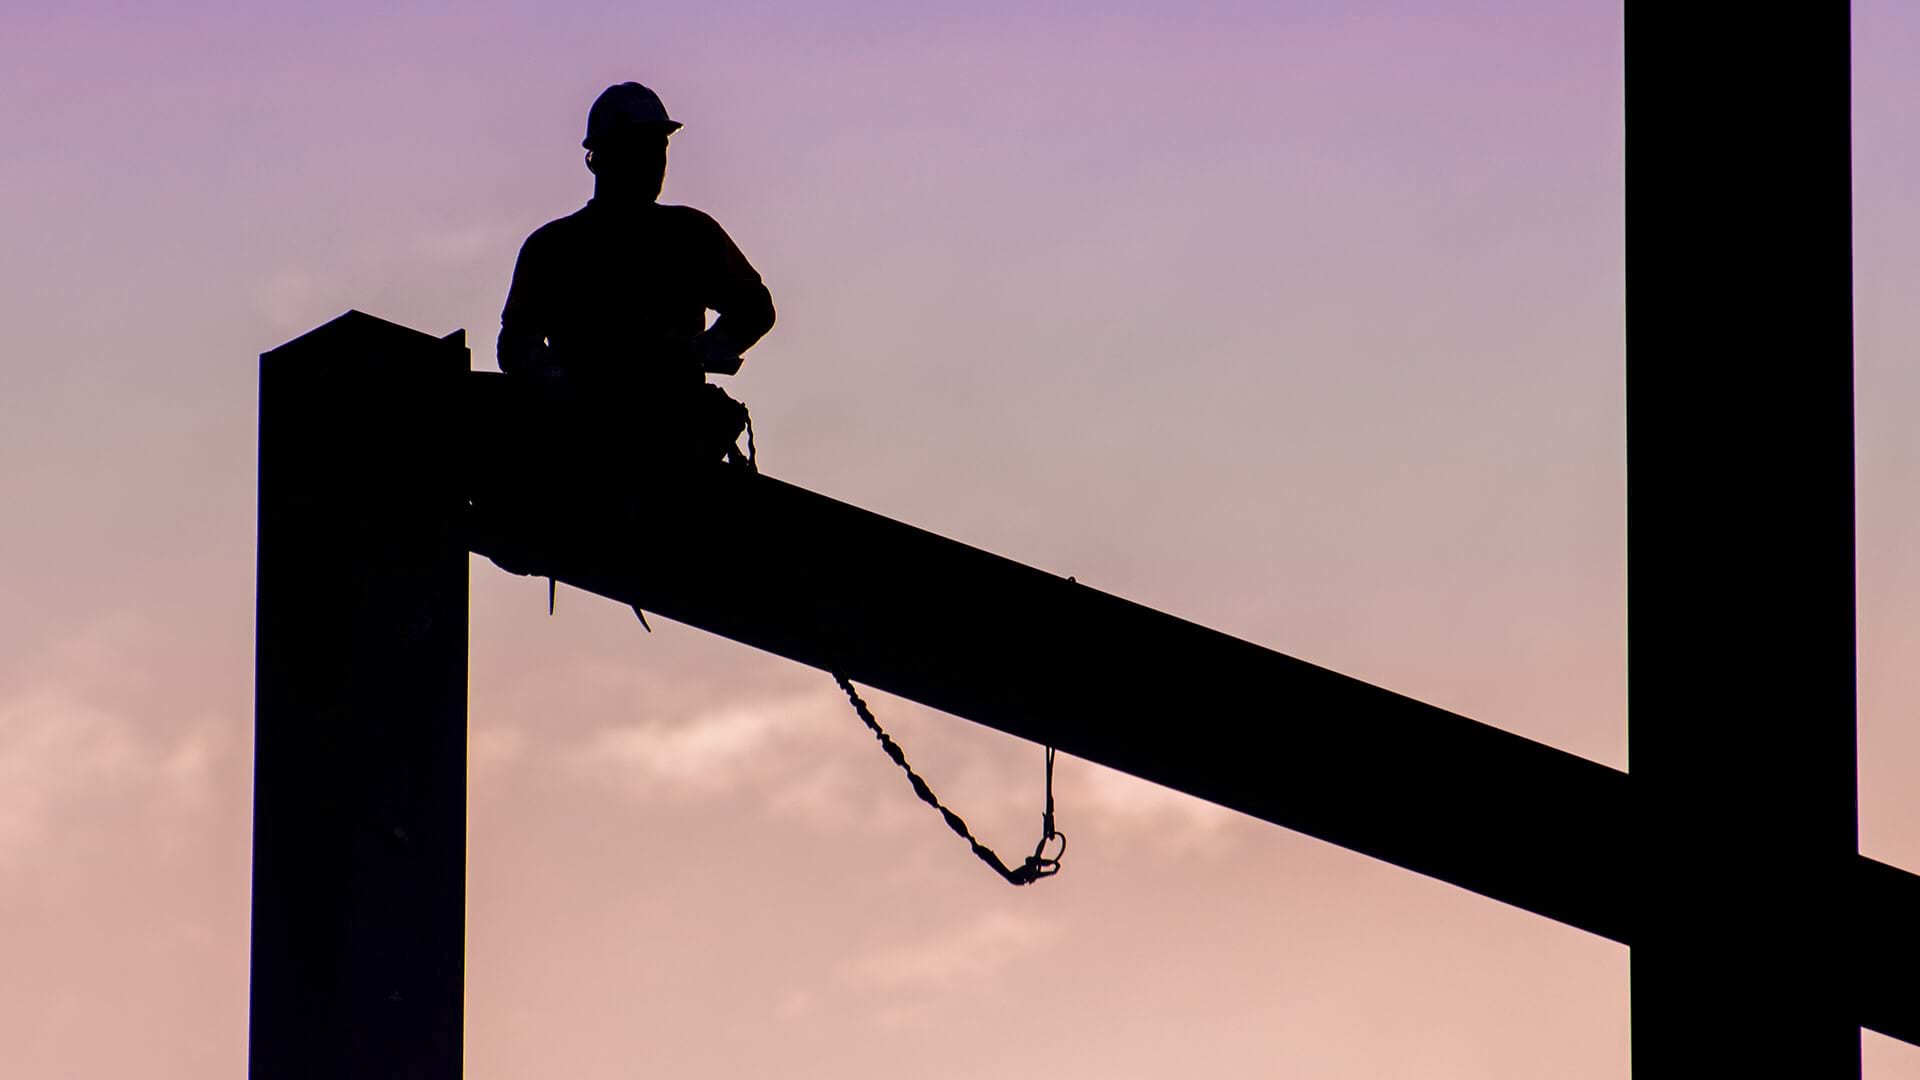 A worker in a high hat, sitting on a beam represents construction firms using location intelligence from GIS